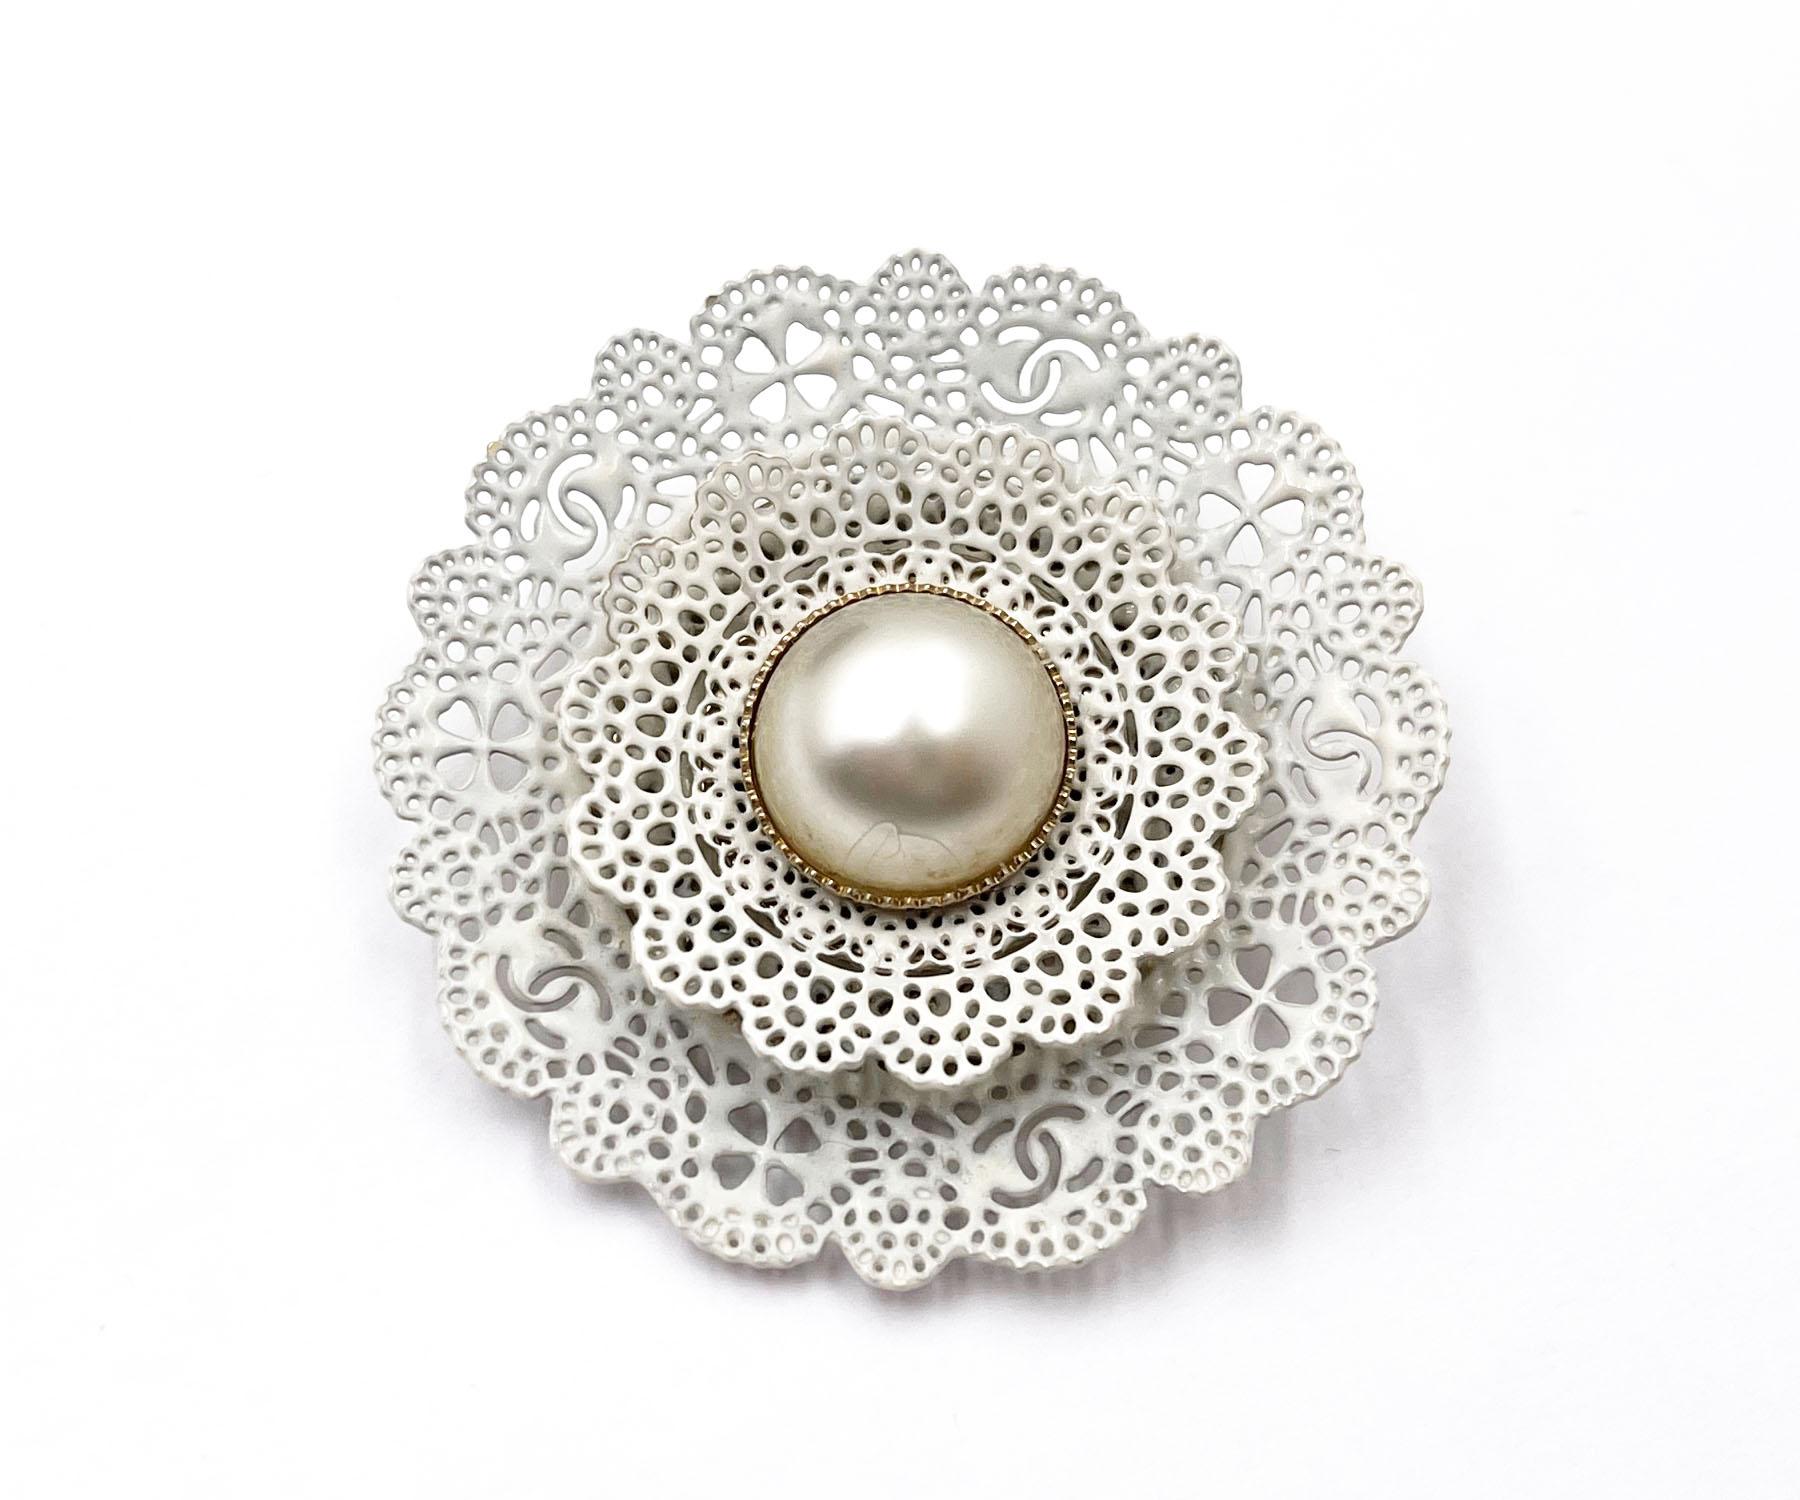 Chanel Pearl CC White Lace Brooch

* Marked 15
*Made in Italy
*Comes with the original box 

- It is approximately 2